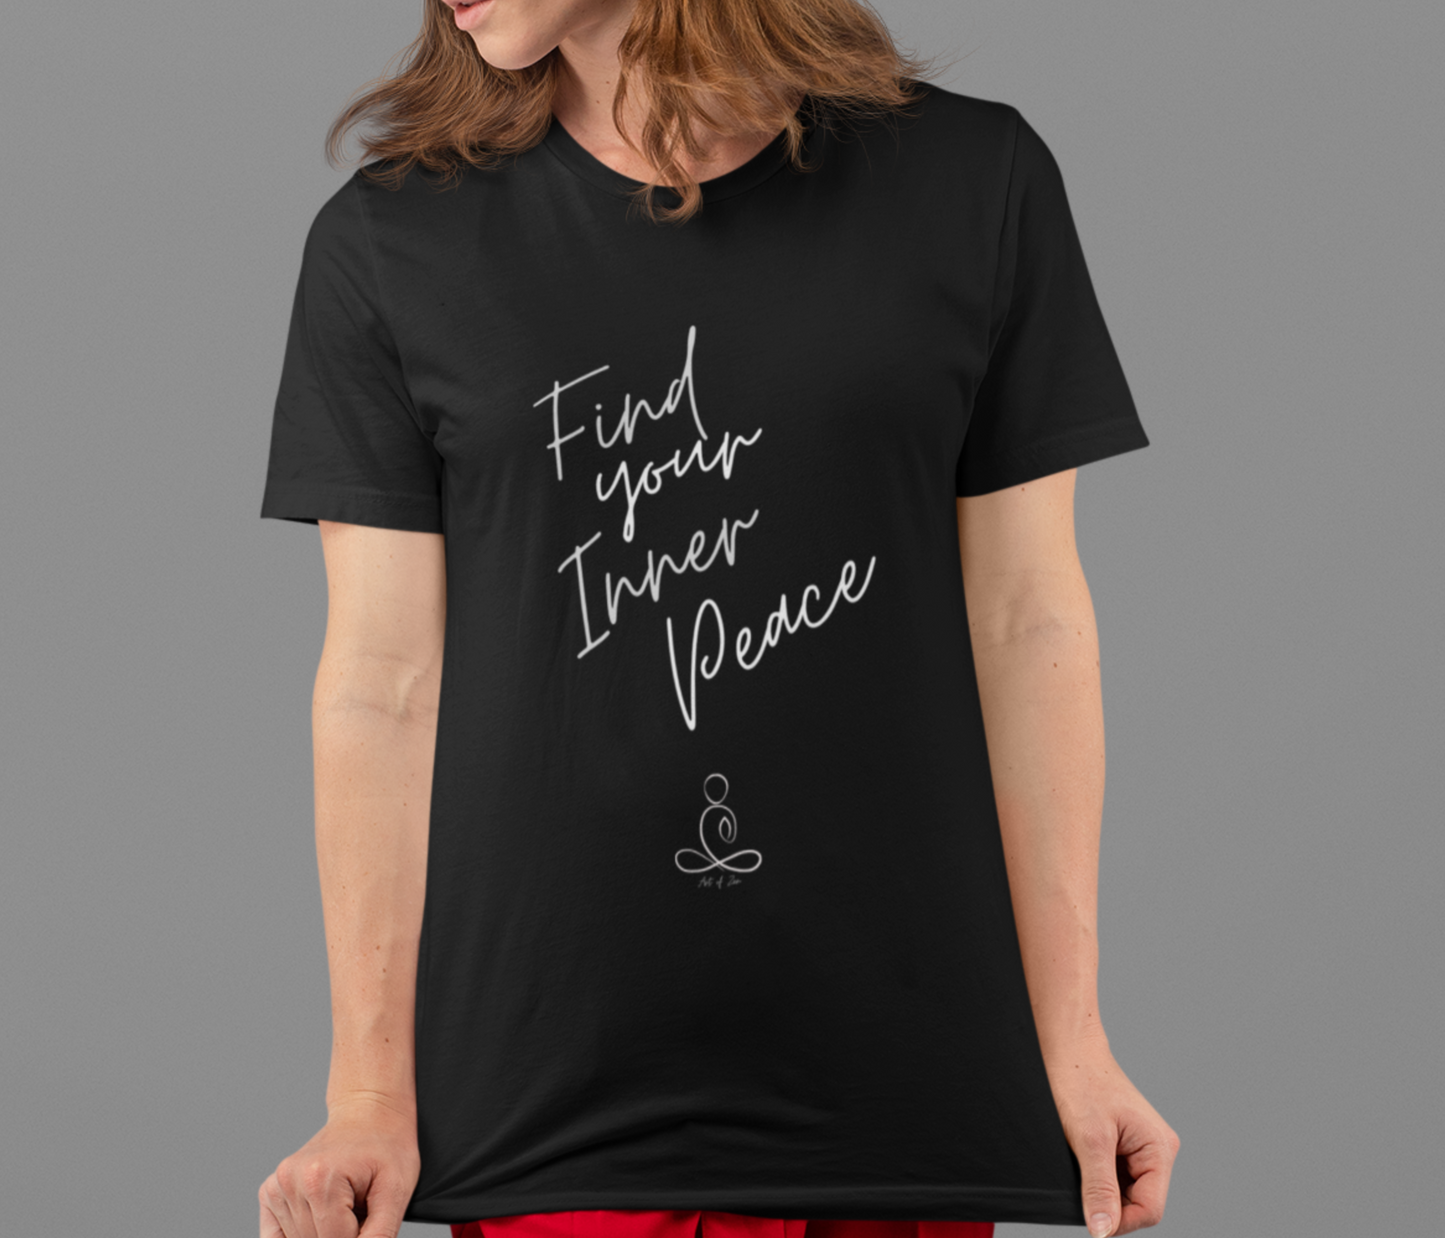 Find Your Inner Peace Art of Zen T-Shirt Peace Love Yoga Namaste Positive Vibes Mindfulness Mantra